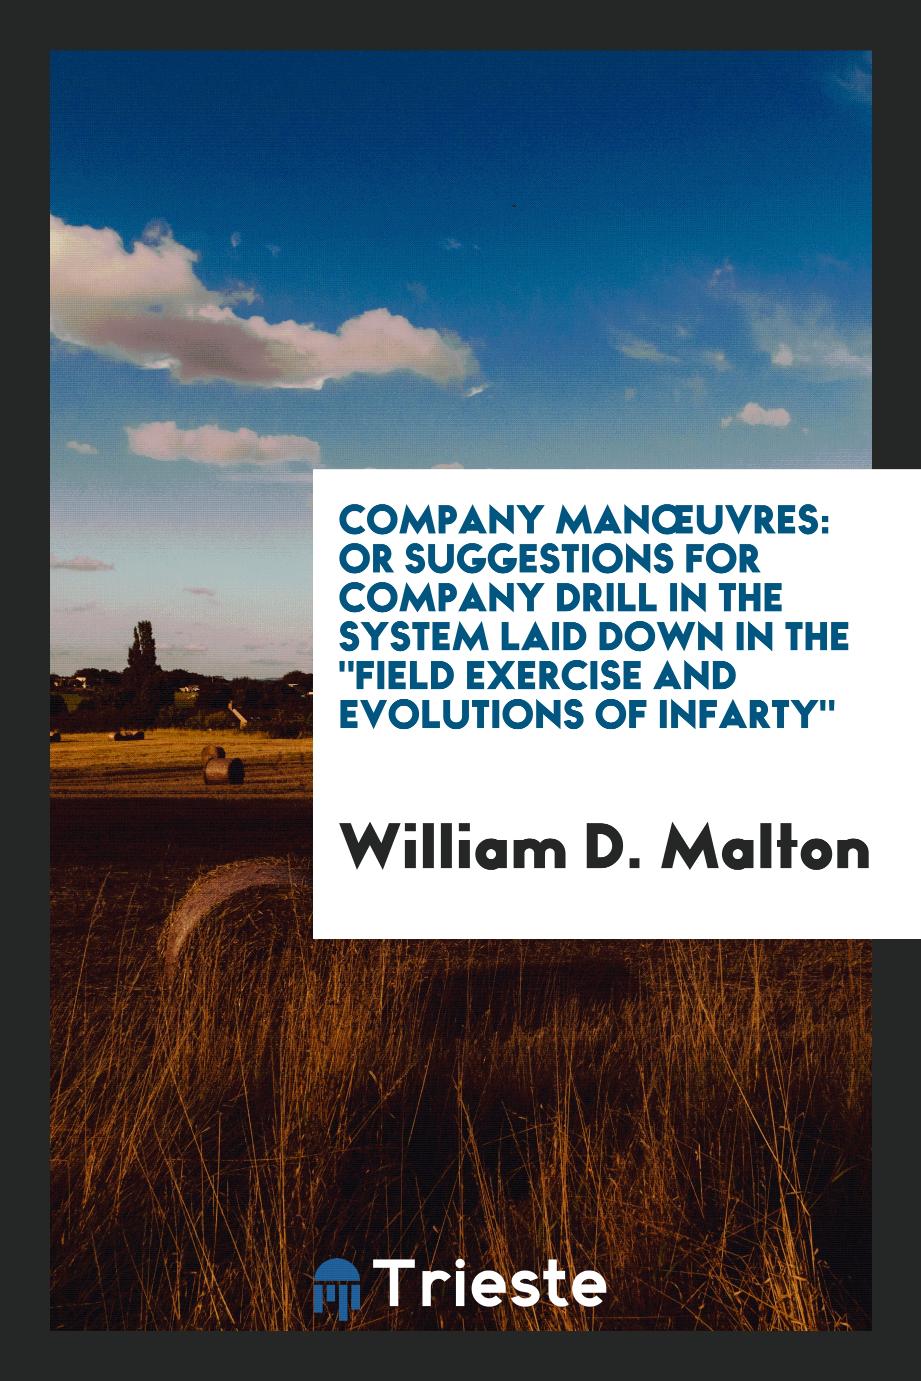 Company manœuvres: or Suggestions for company drill in the system laid down in the "Field Exercise and Evolutions of Infarty"